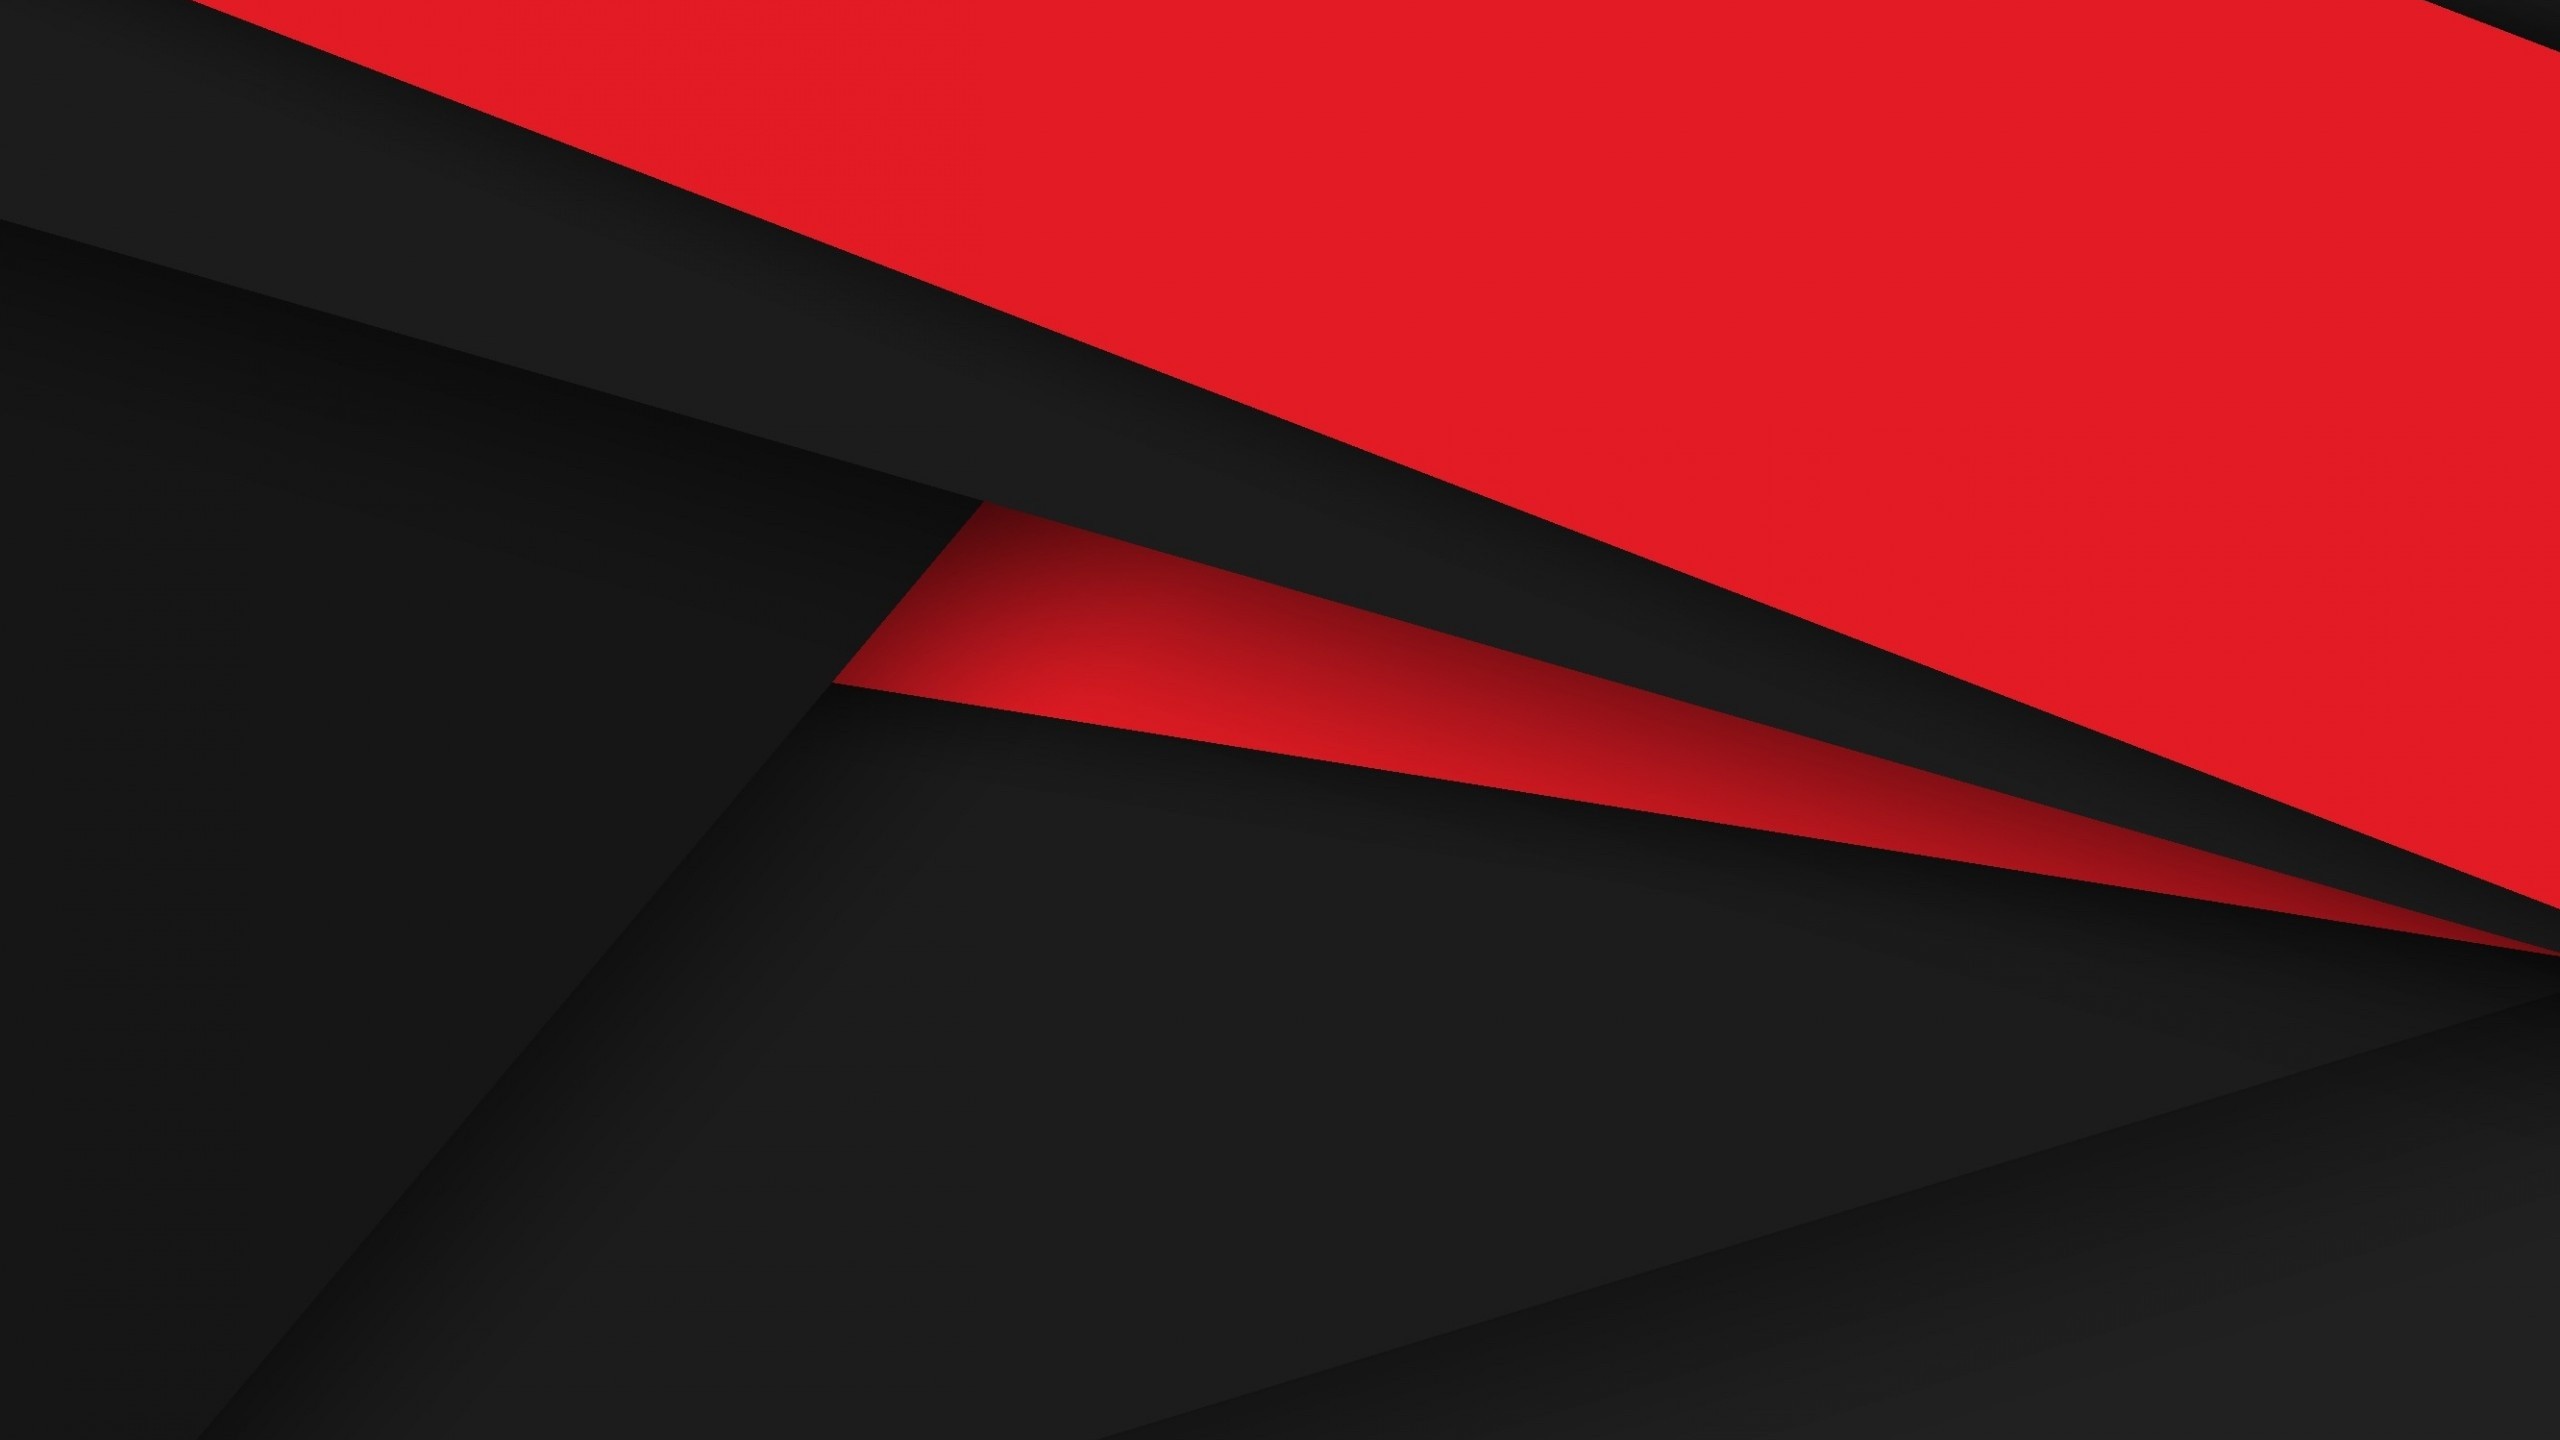 black and red wallpaper,red,black,line,triangle,design